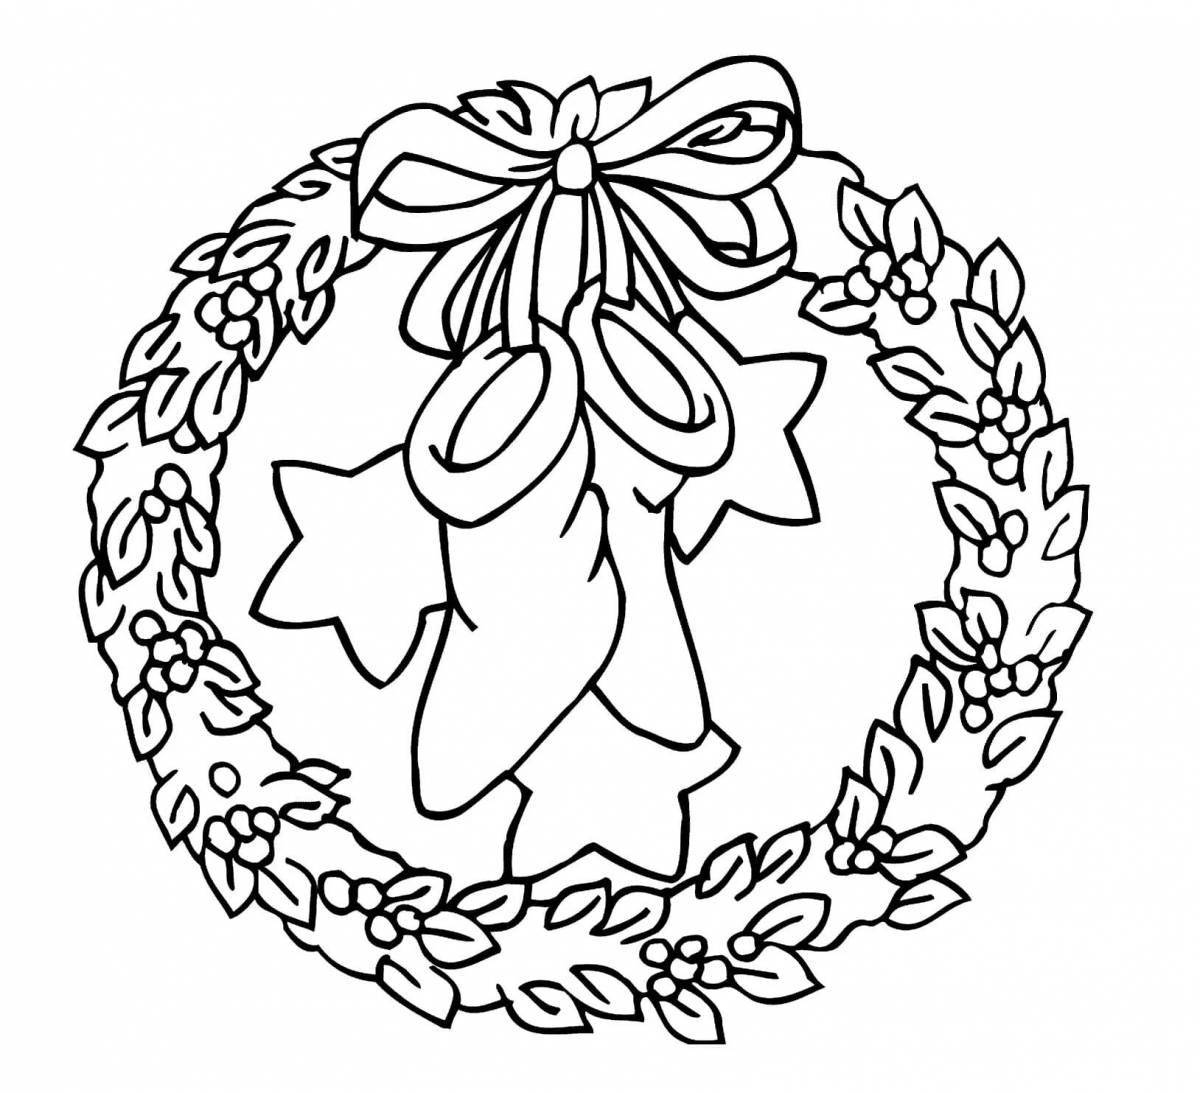 Charming wreath coloring book